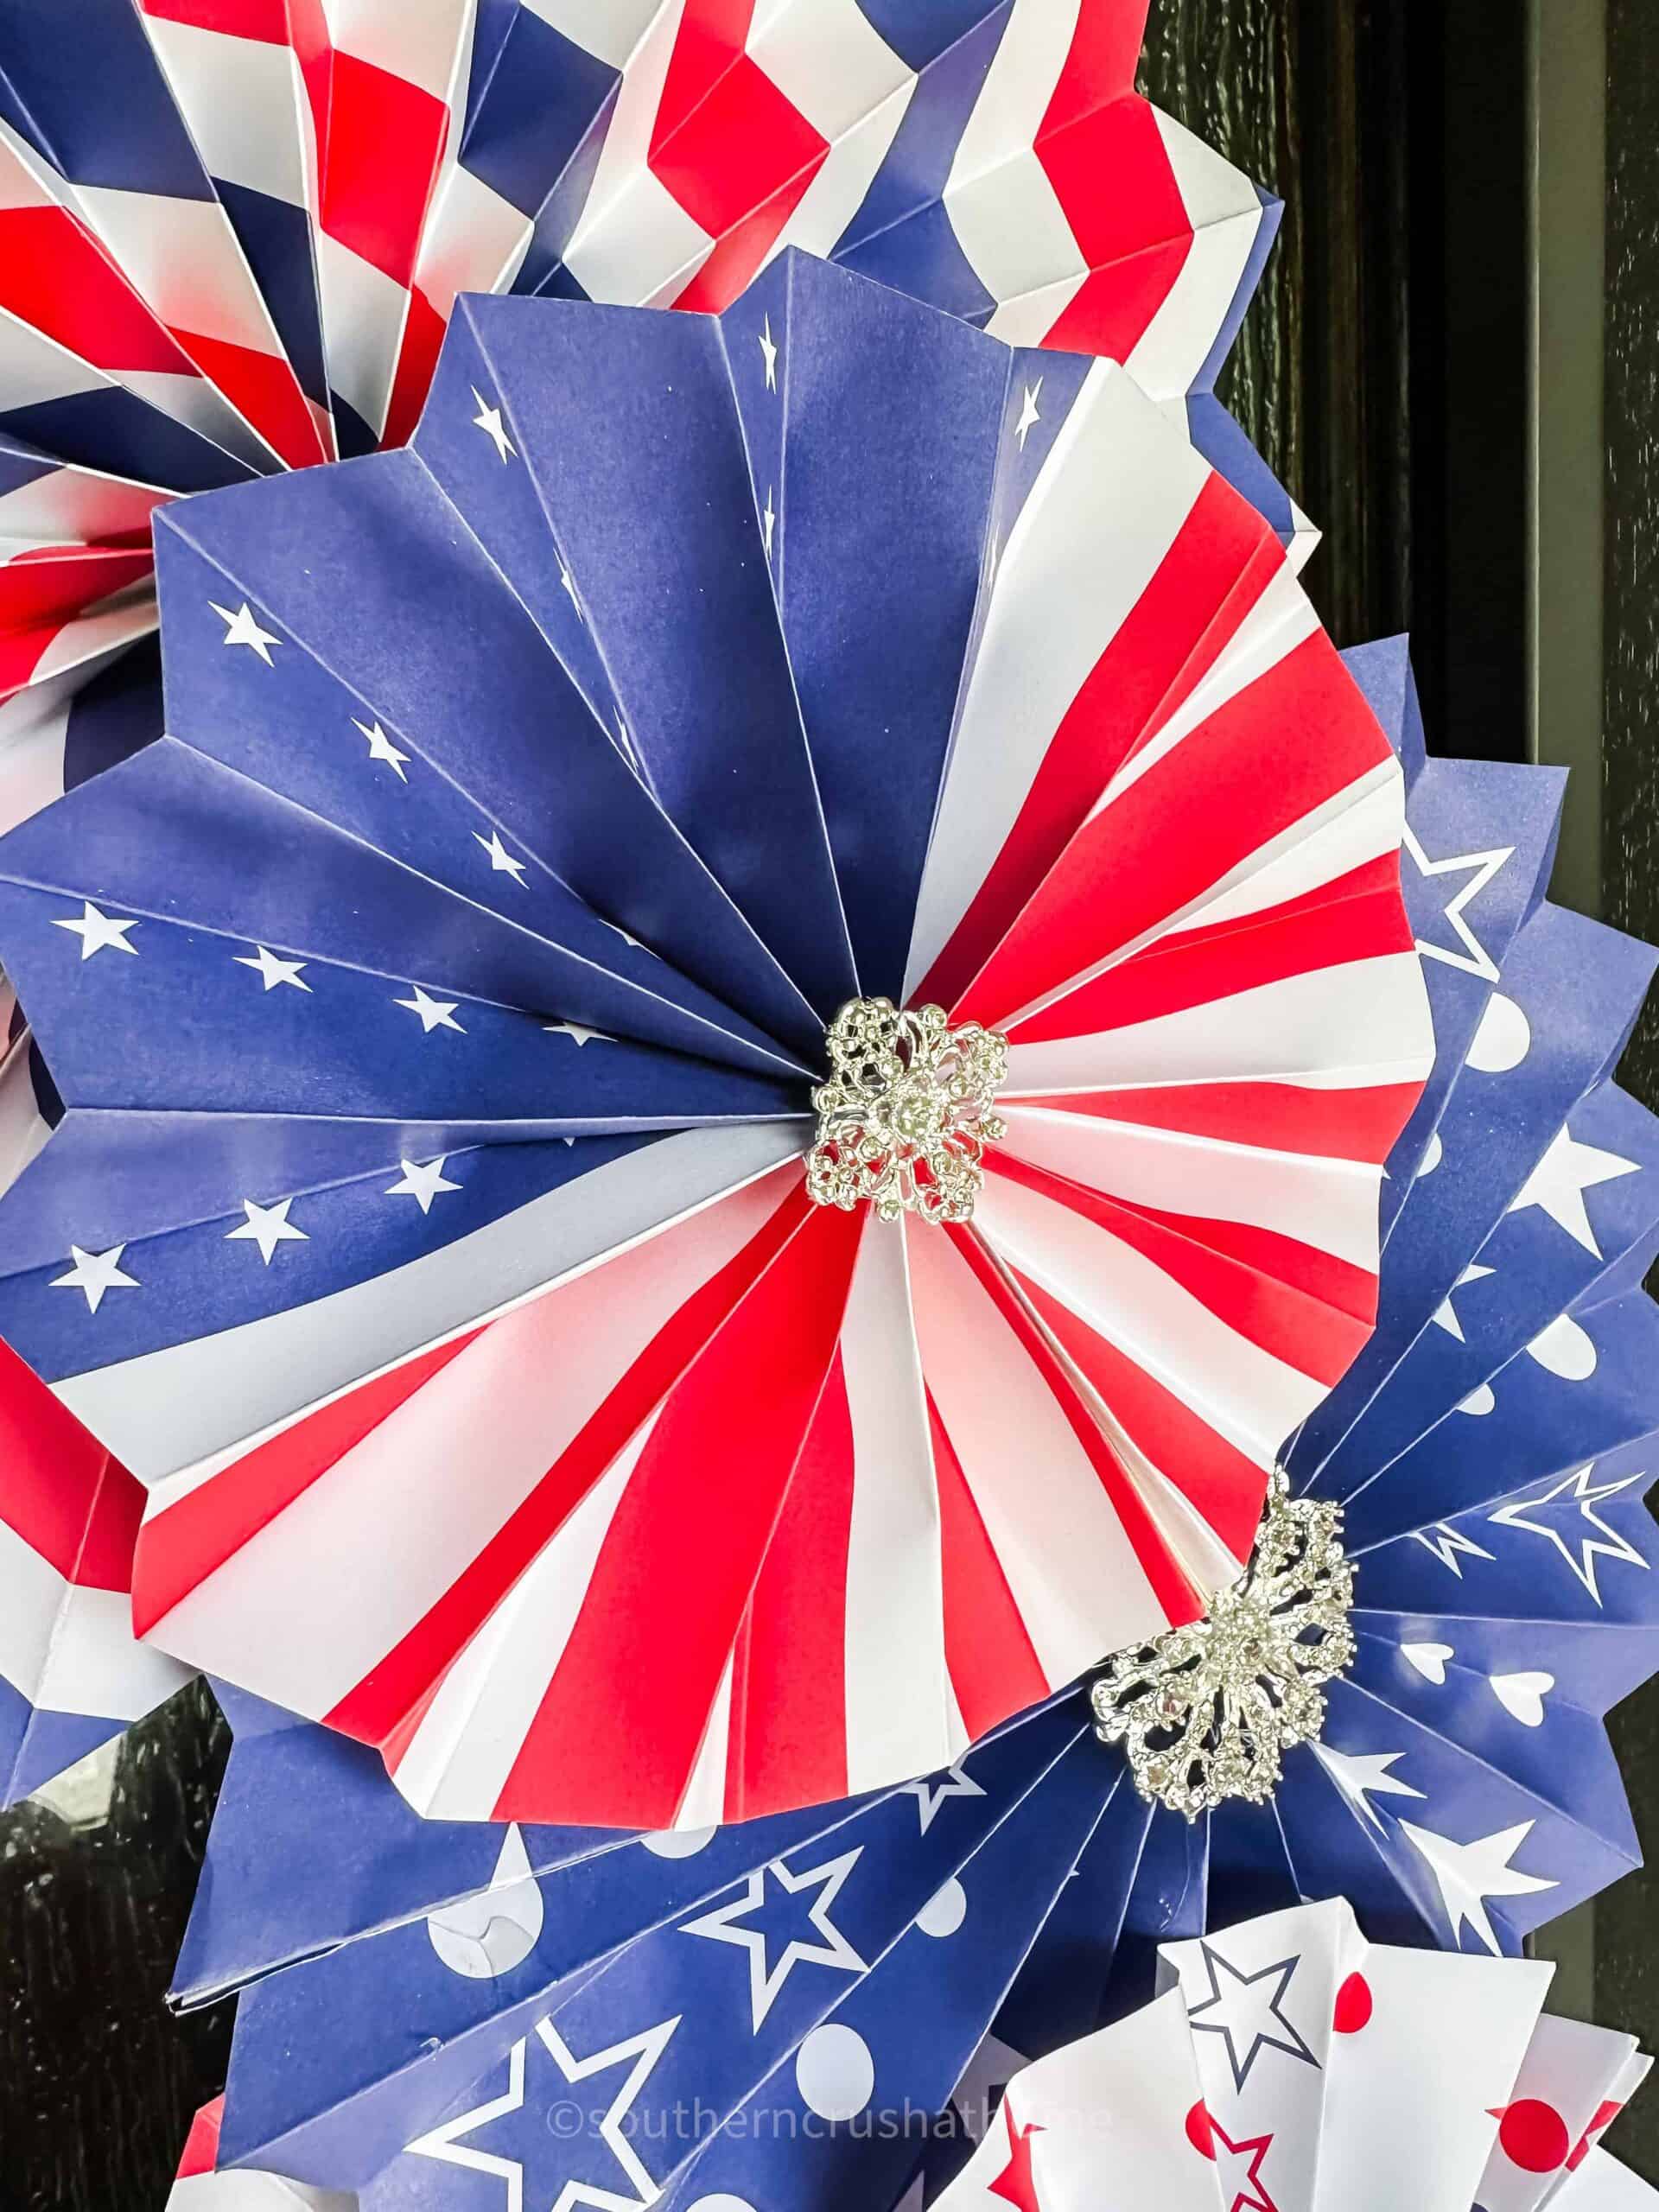 up close of red white and blue american flag paper fan